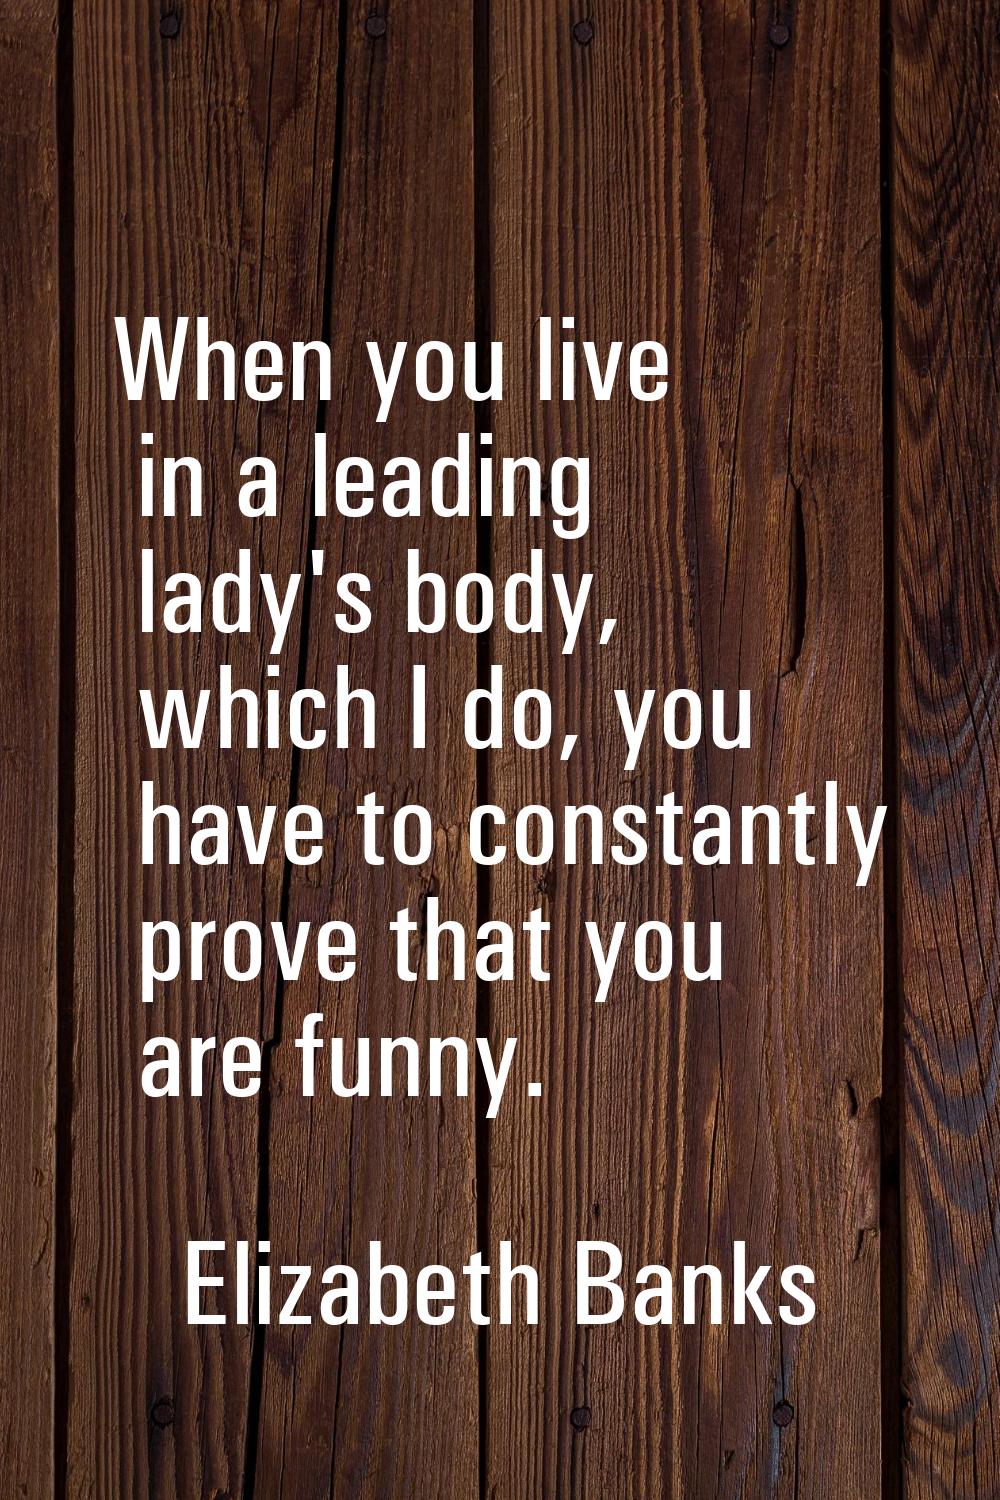 When you live in a leading lady's body, which I do, you have to constantly prove that you are funny